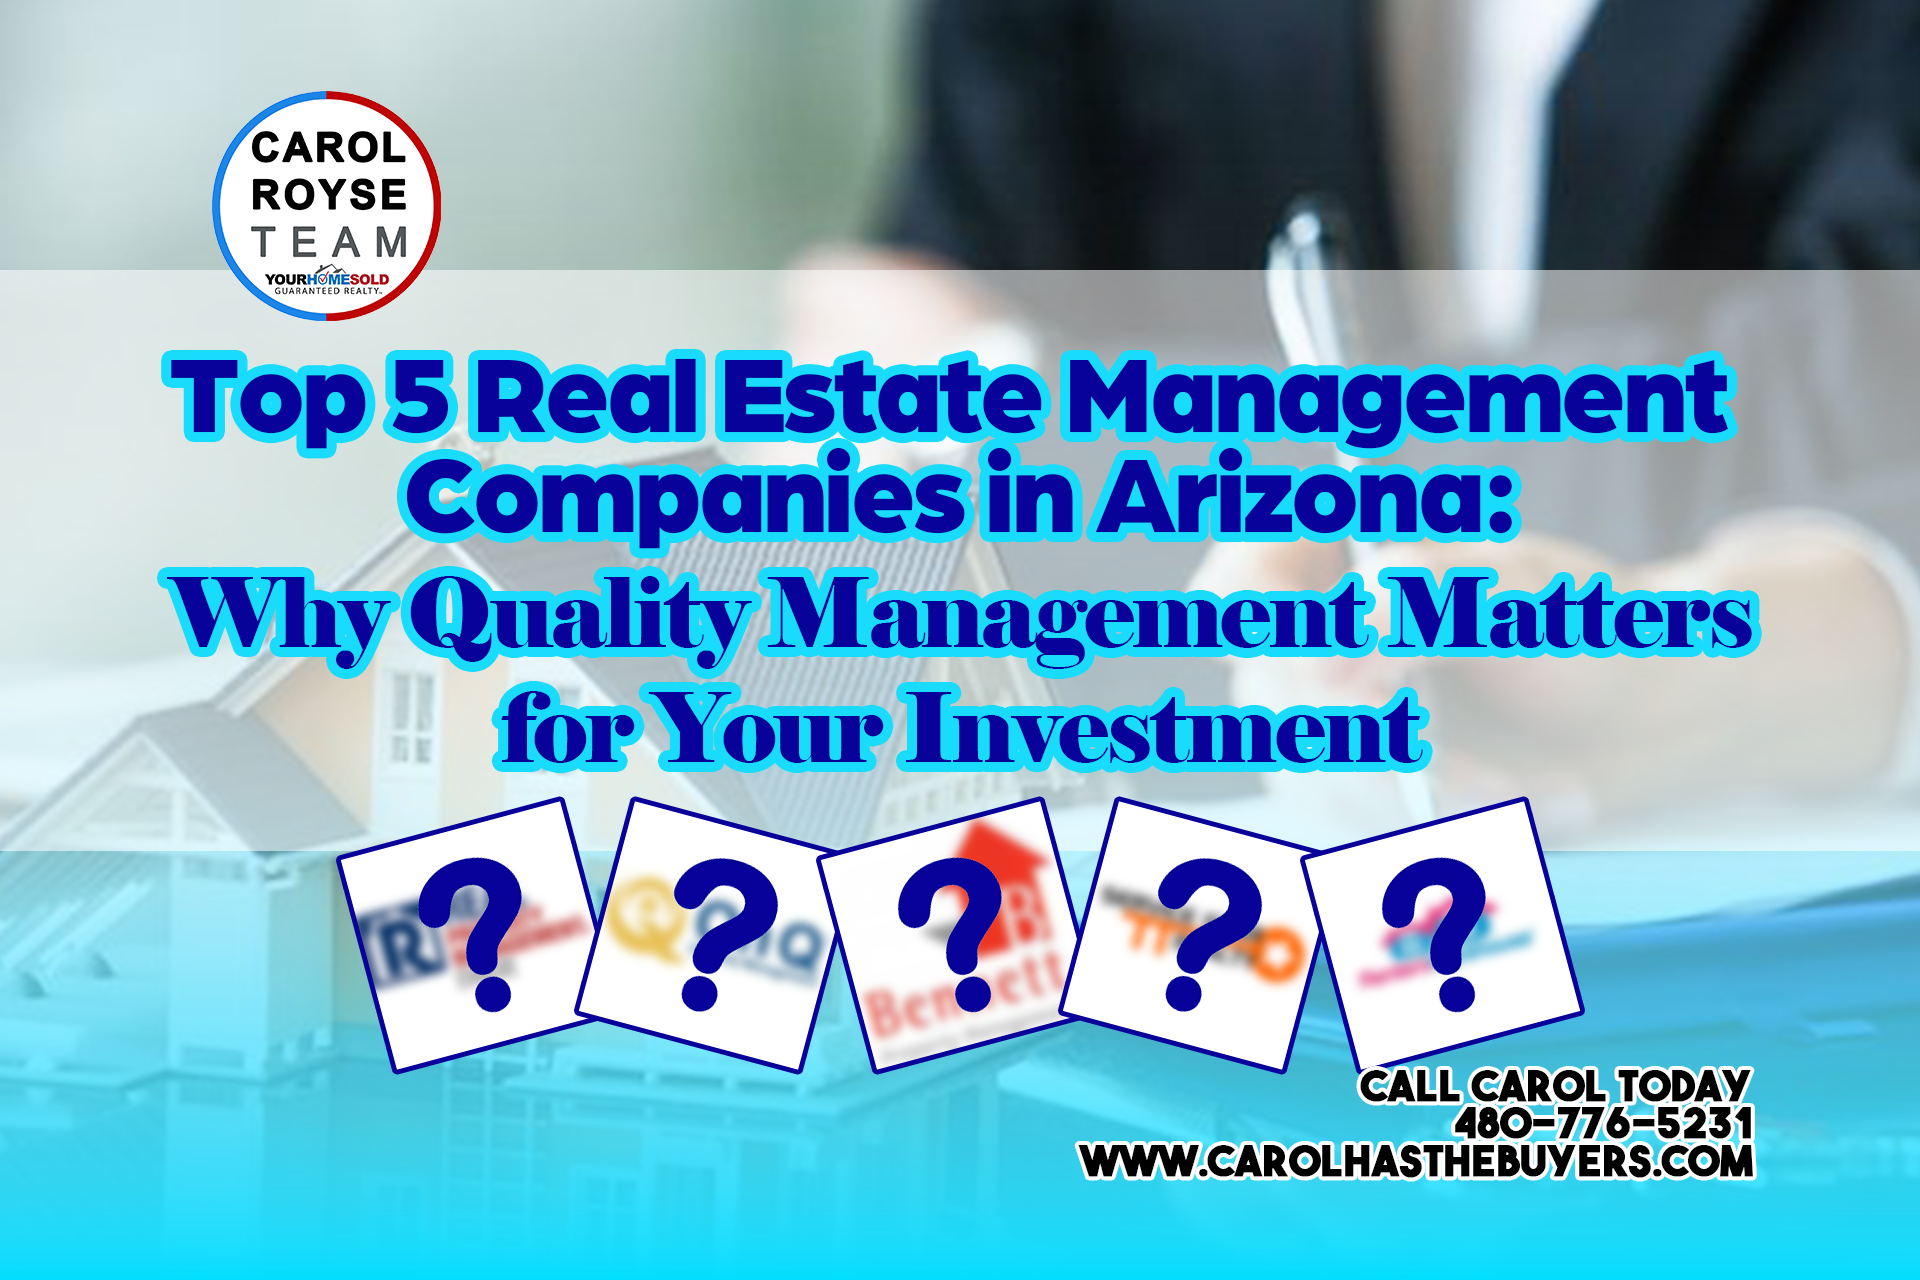 Top 5 Real Estate Management Companies in Arizona: Why Quality Management Matters for Your Investment